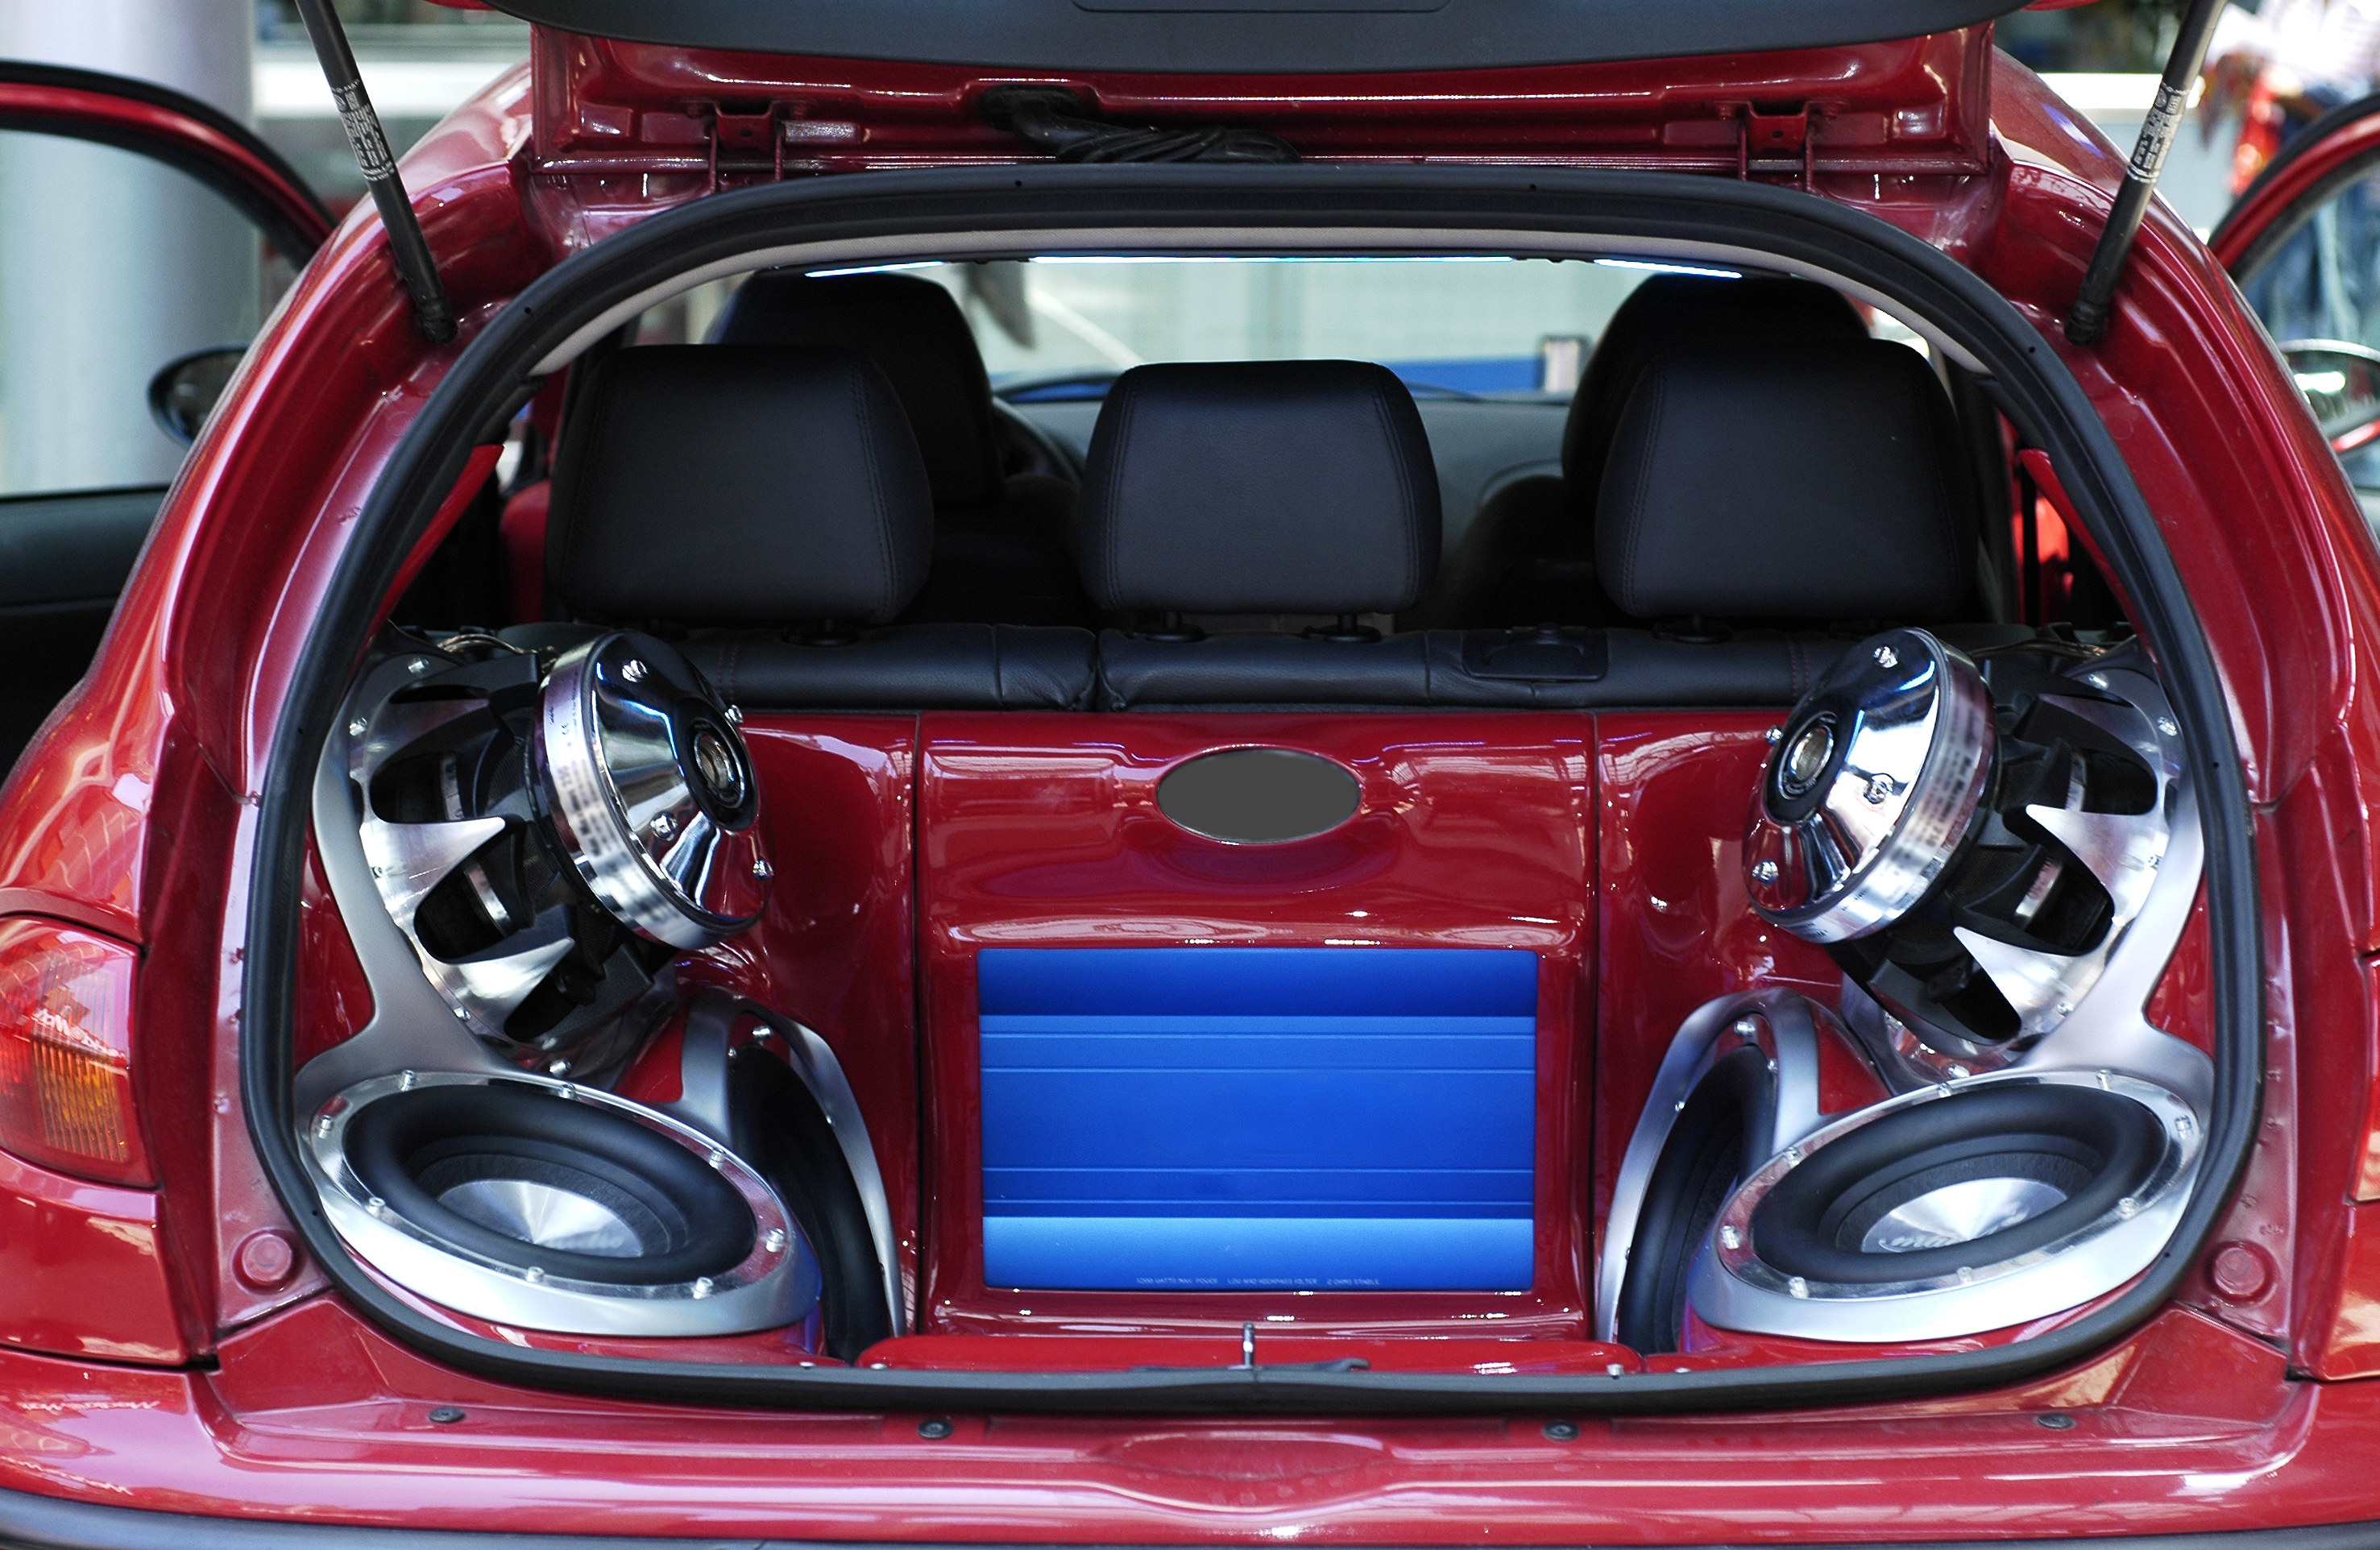 Speakers and a sound system in the back of a car